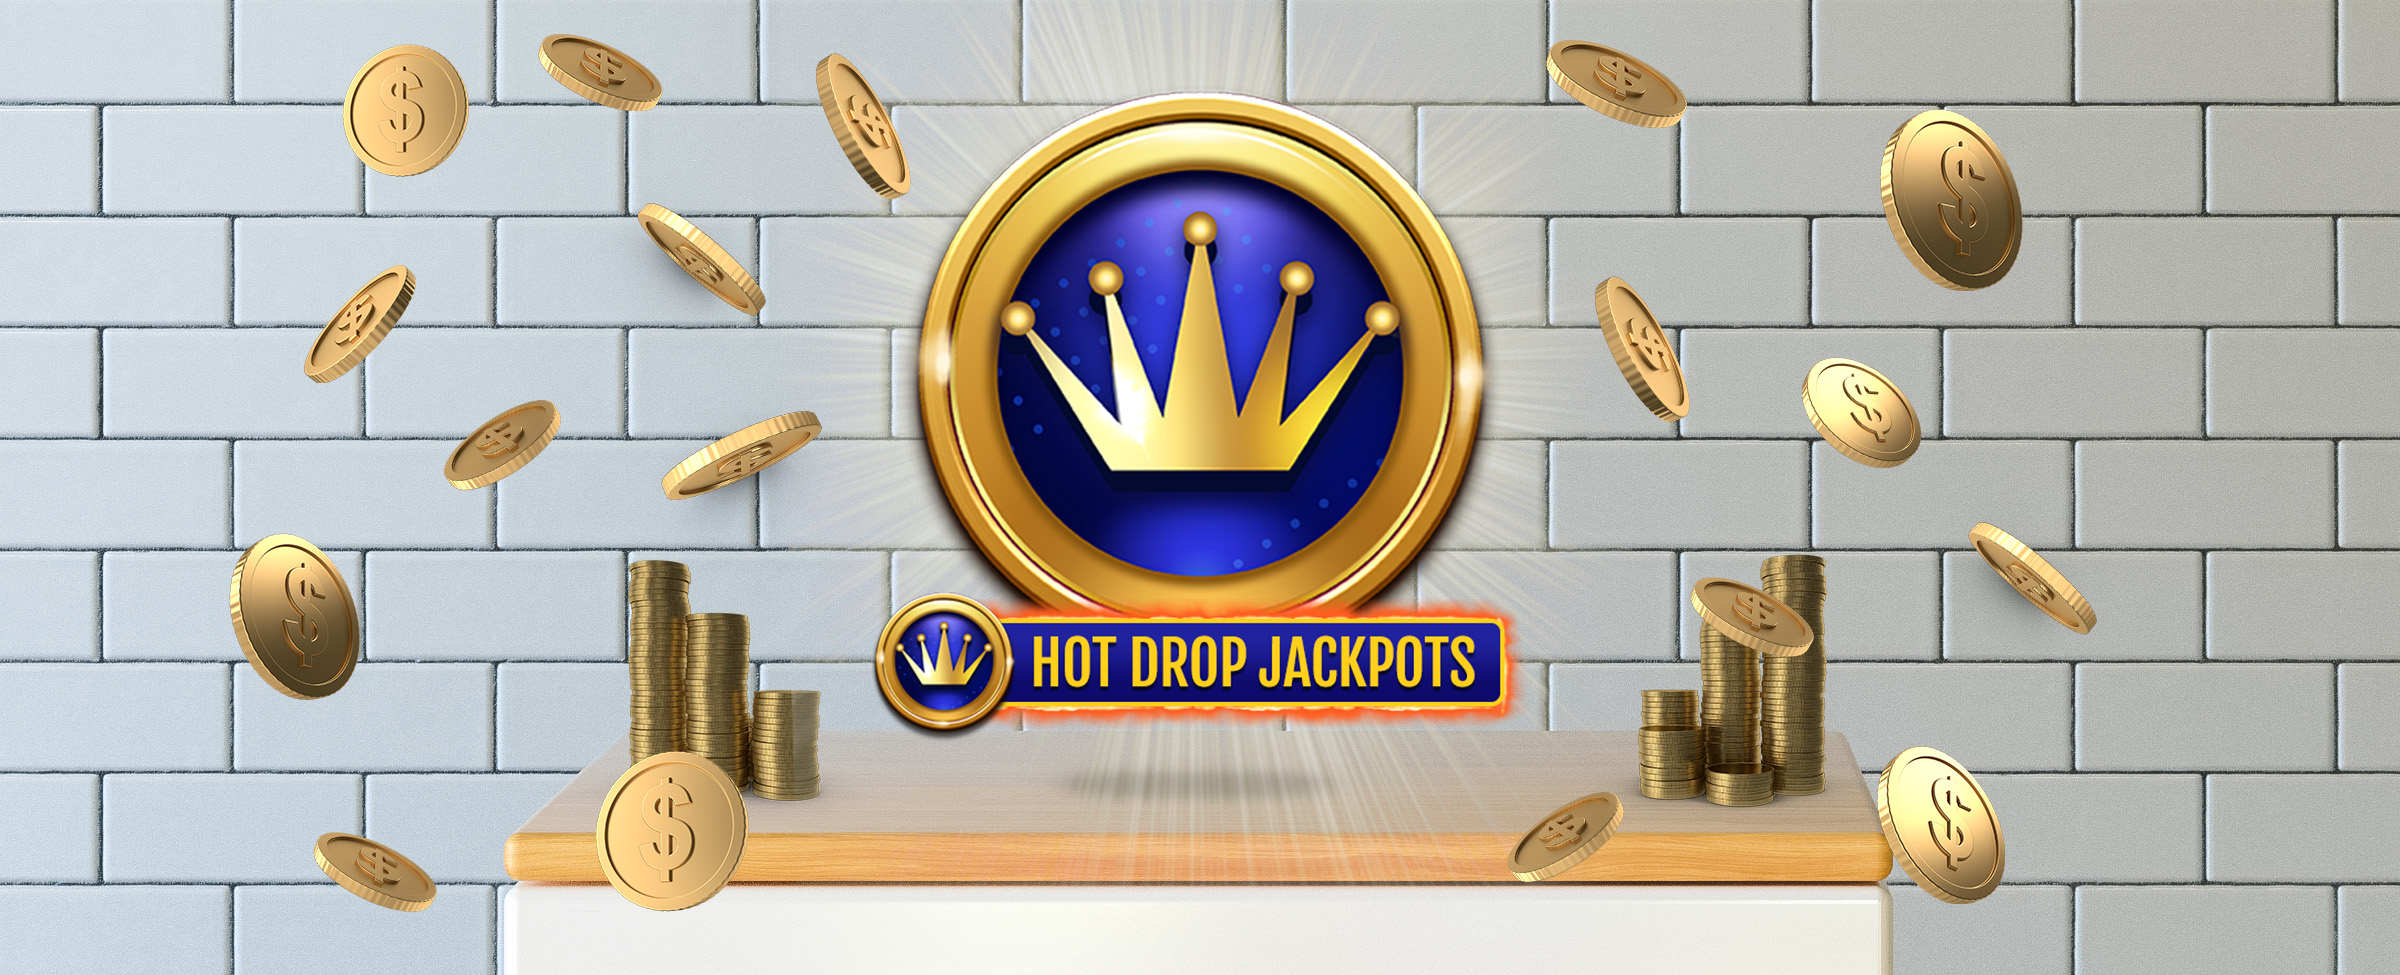 Cafe Casino Hot Drop Jackpots logo hovers above a kitchen cabinet flanked on either side by coin stacks, surrounded by oversized gold coins floating around it. A white subway-tiled wall is seen in the background.